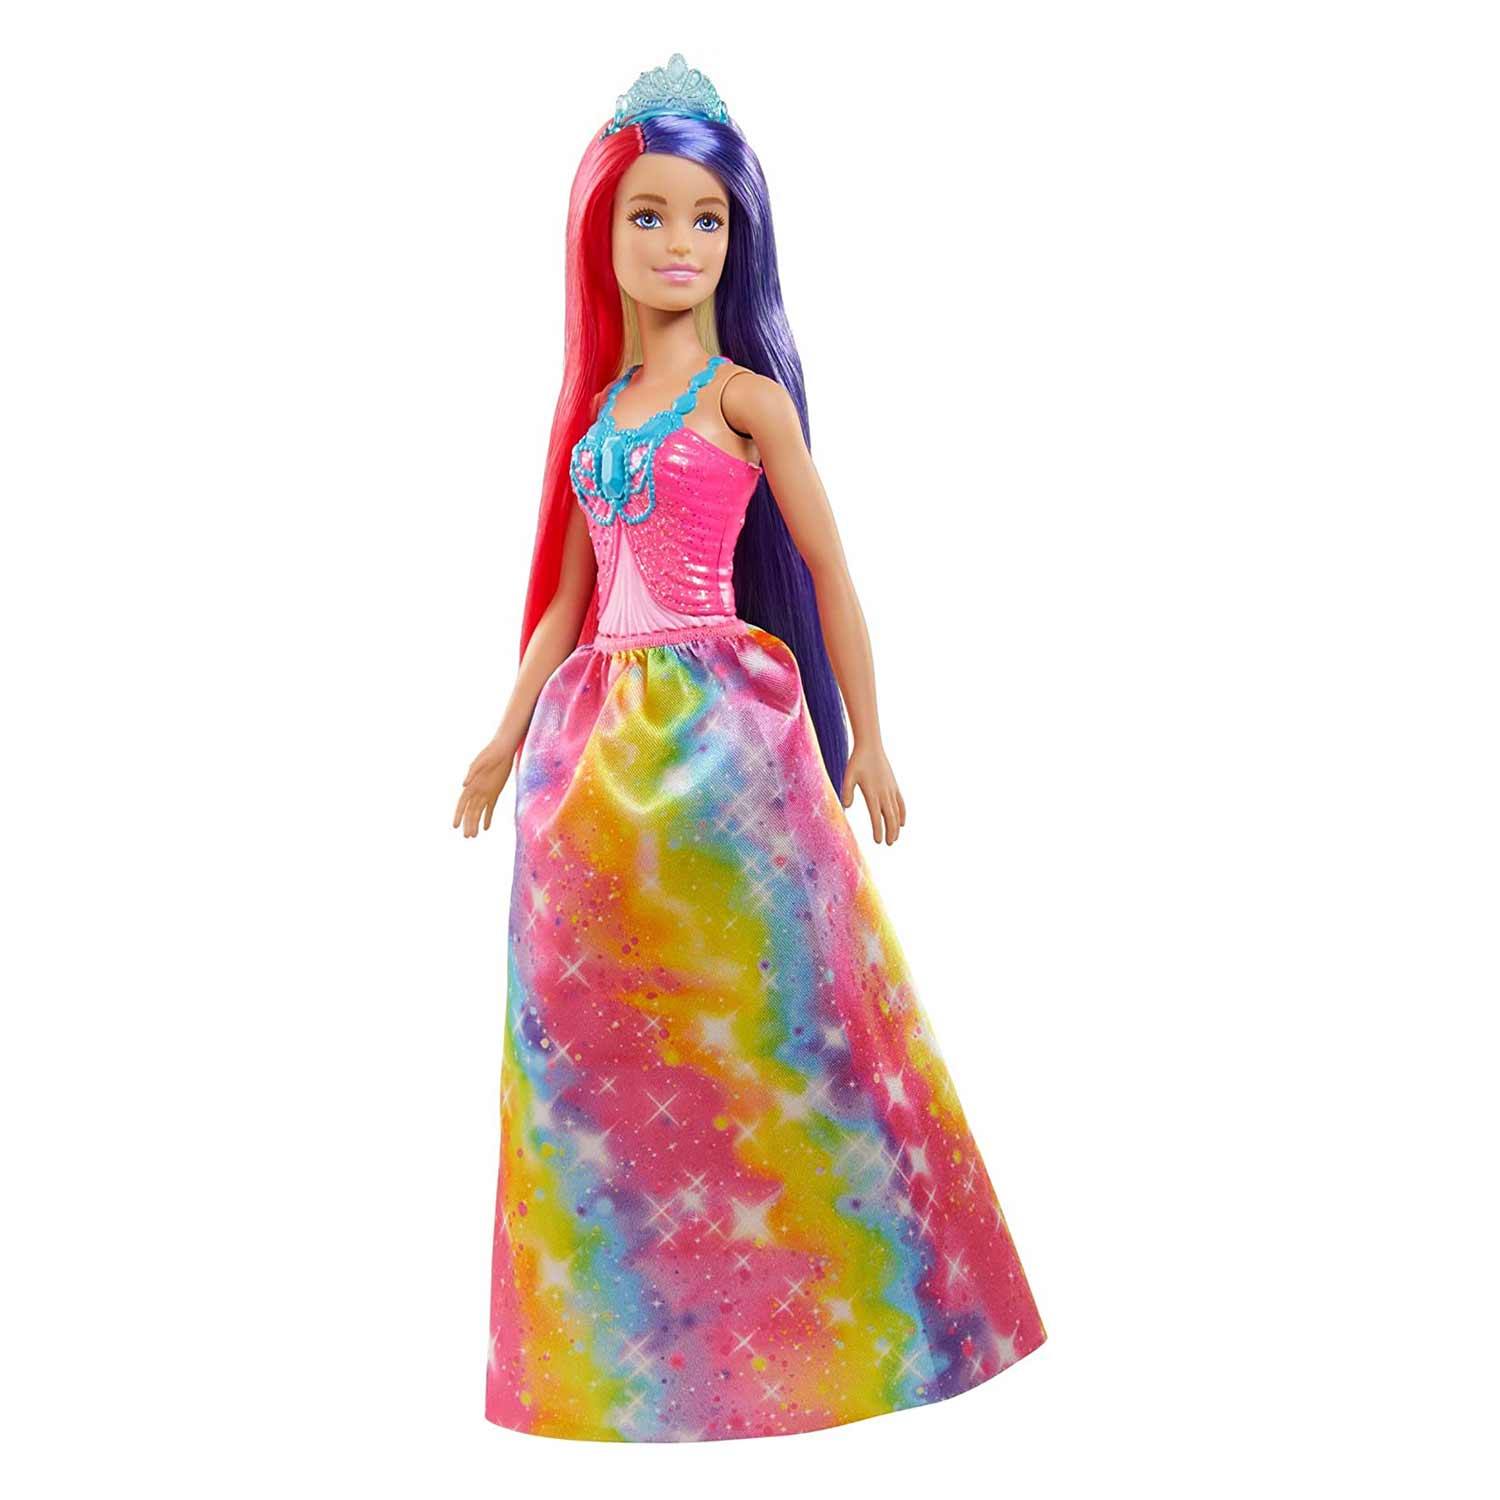 Barbie Dreamtopia Princess Doll with Two-Tone Fantasy Hair and Accessories by Mattel -Mattel - India - www.superherotoystore.com